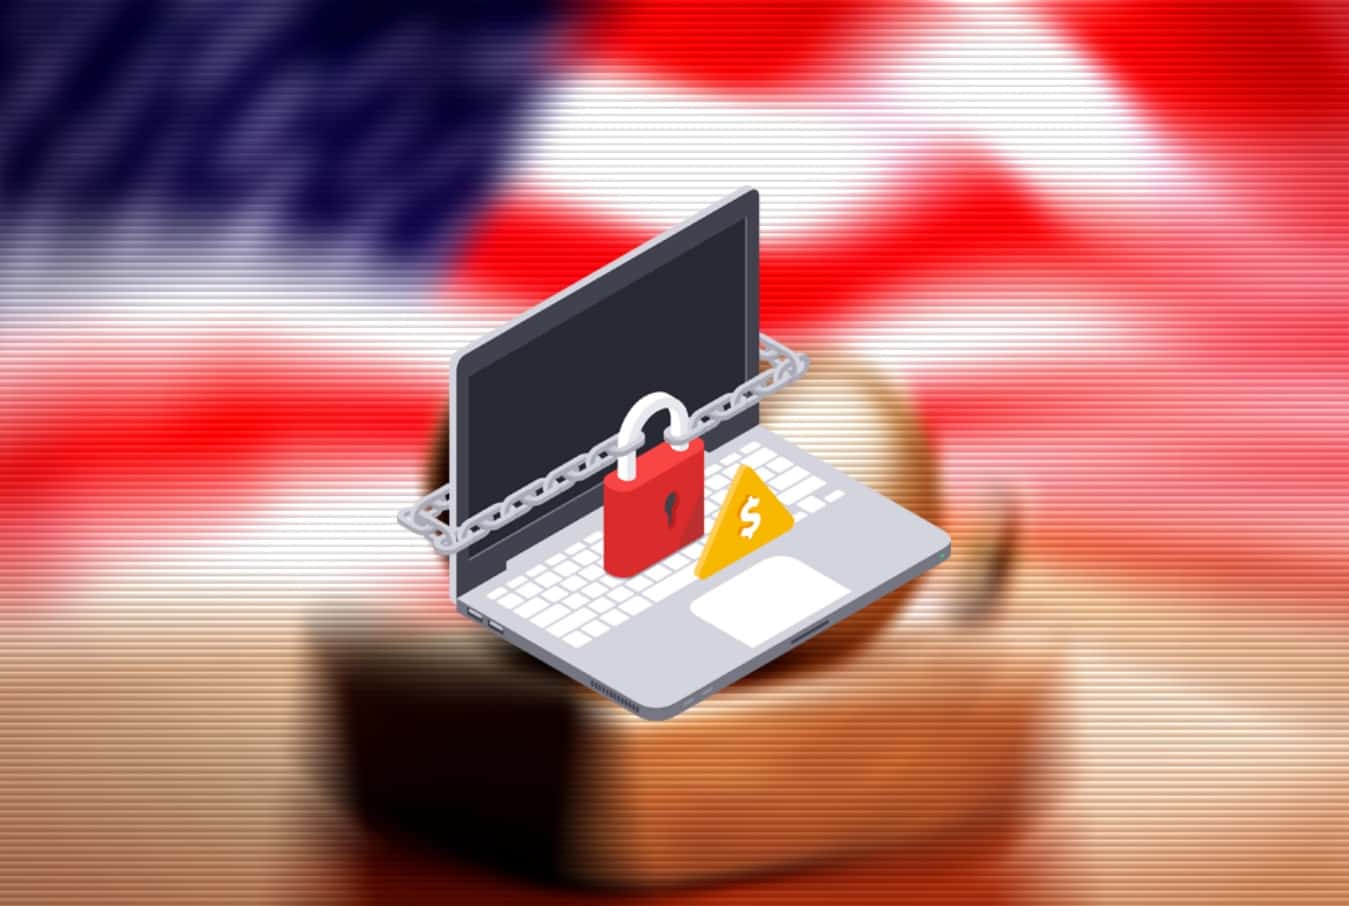 US Criminal Court hit by Conti ransomware; critical data at risk